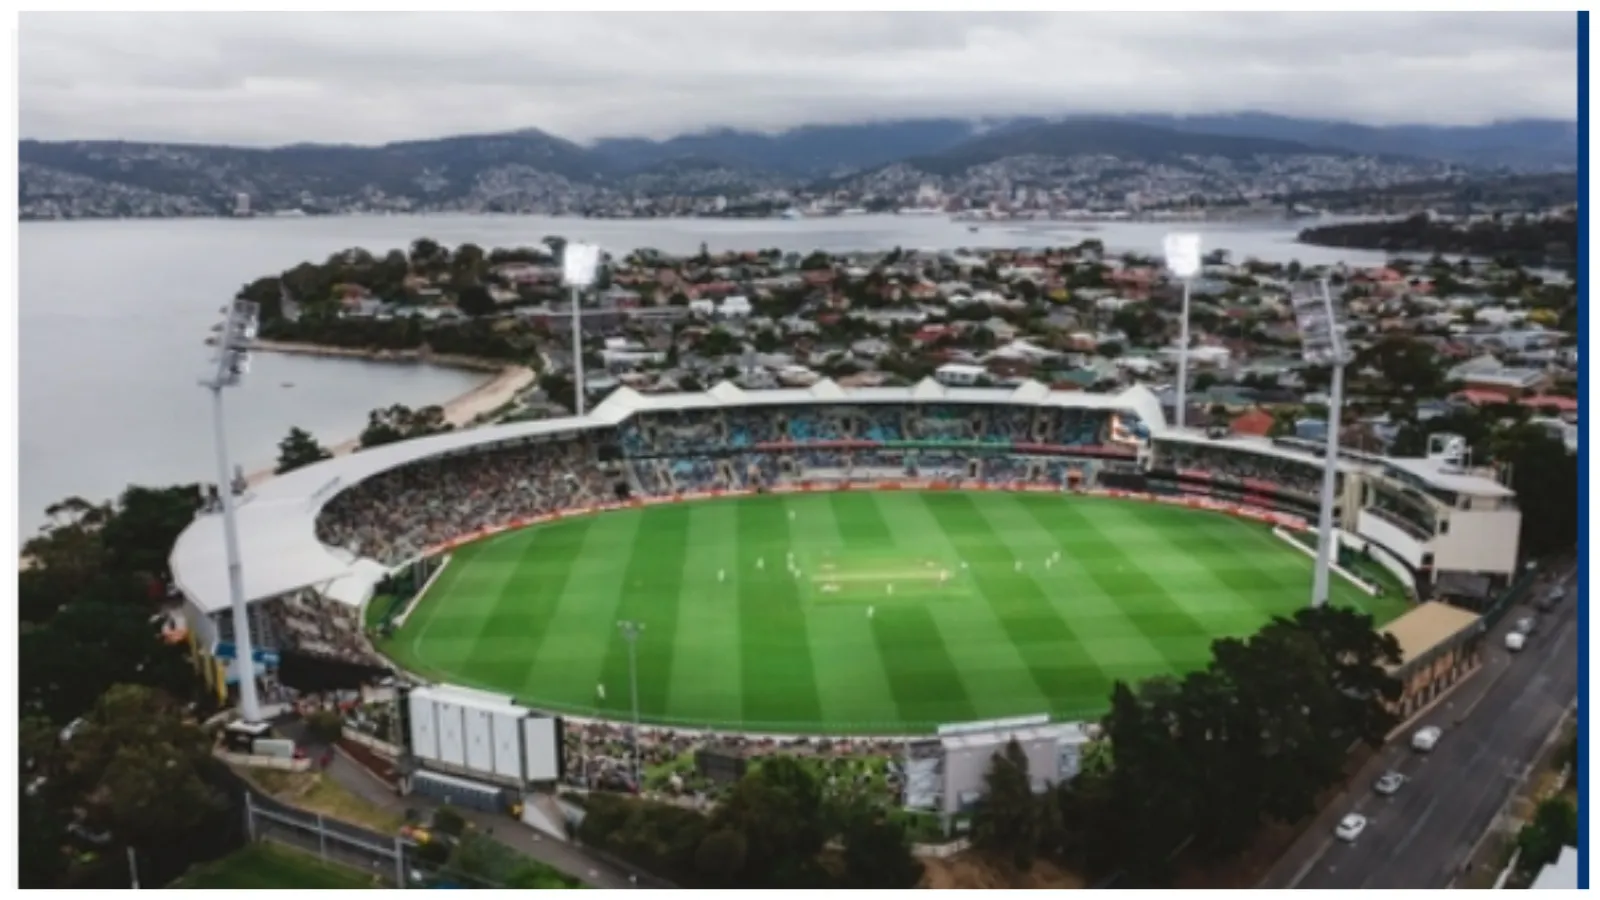 Bellerive Oval Hobart Cricket Ground Boundary Length And Seating Capacity